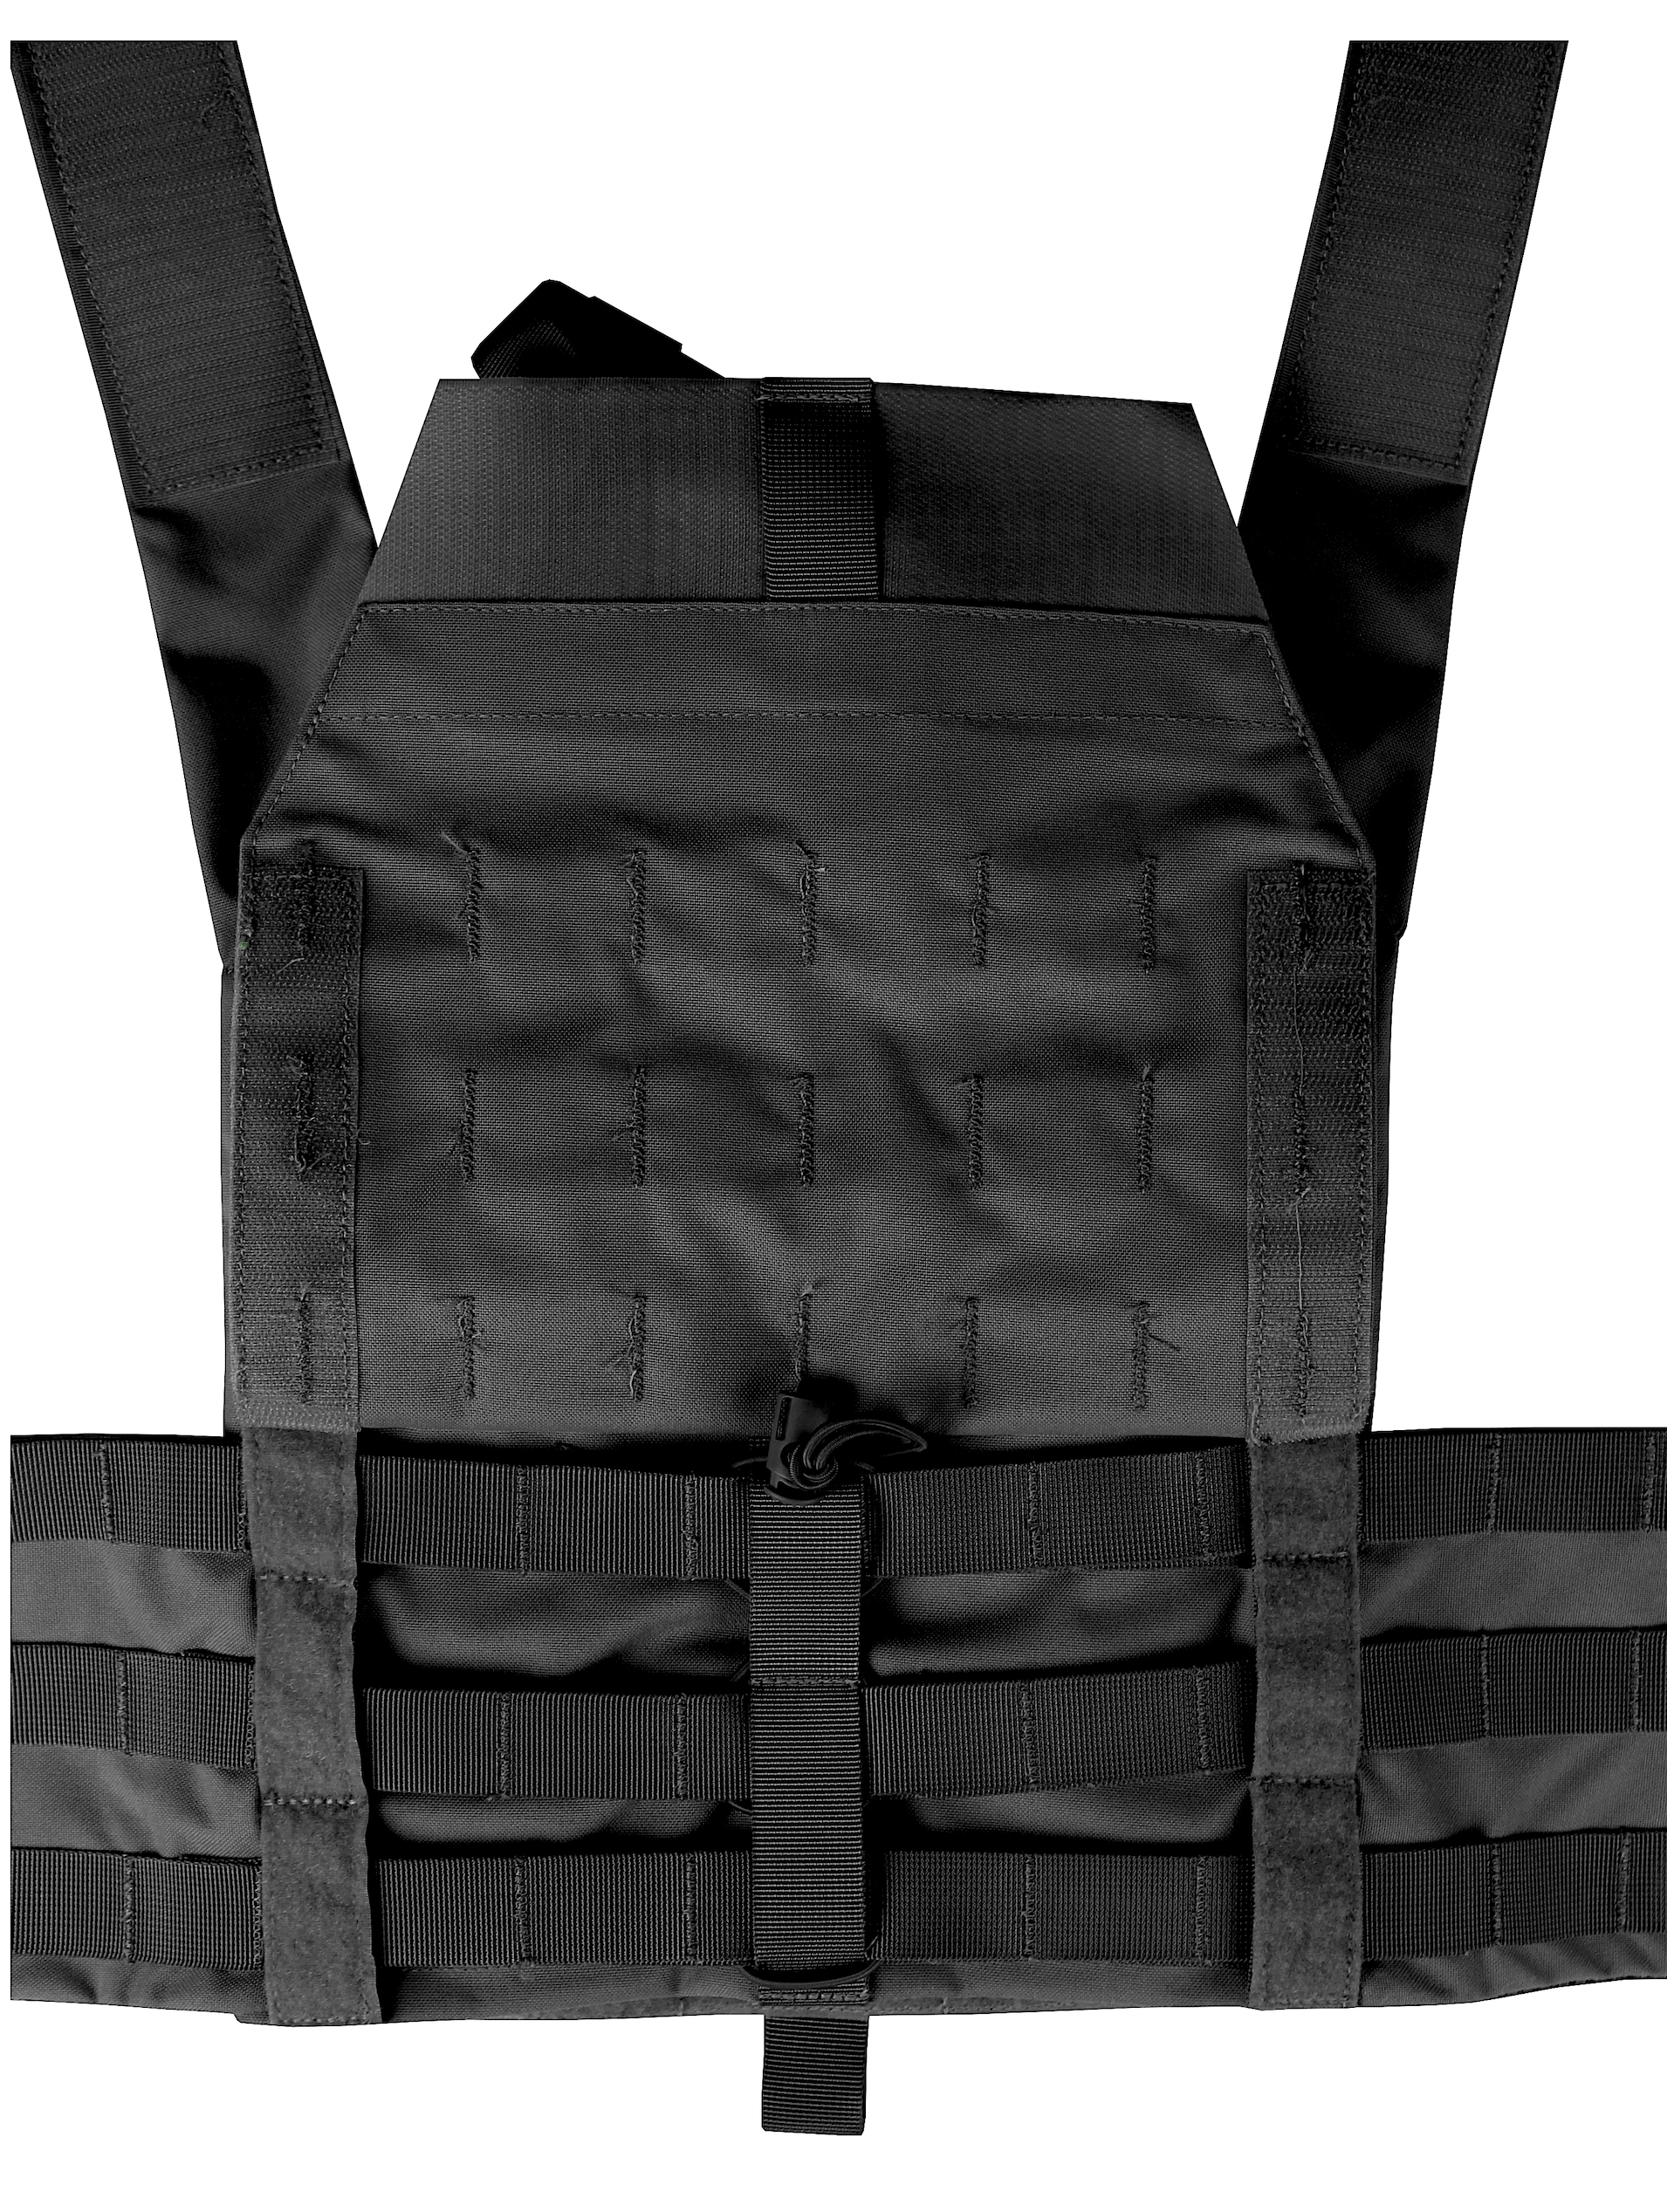 PLATE CARRIER TAC